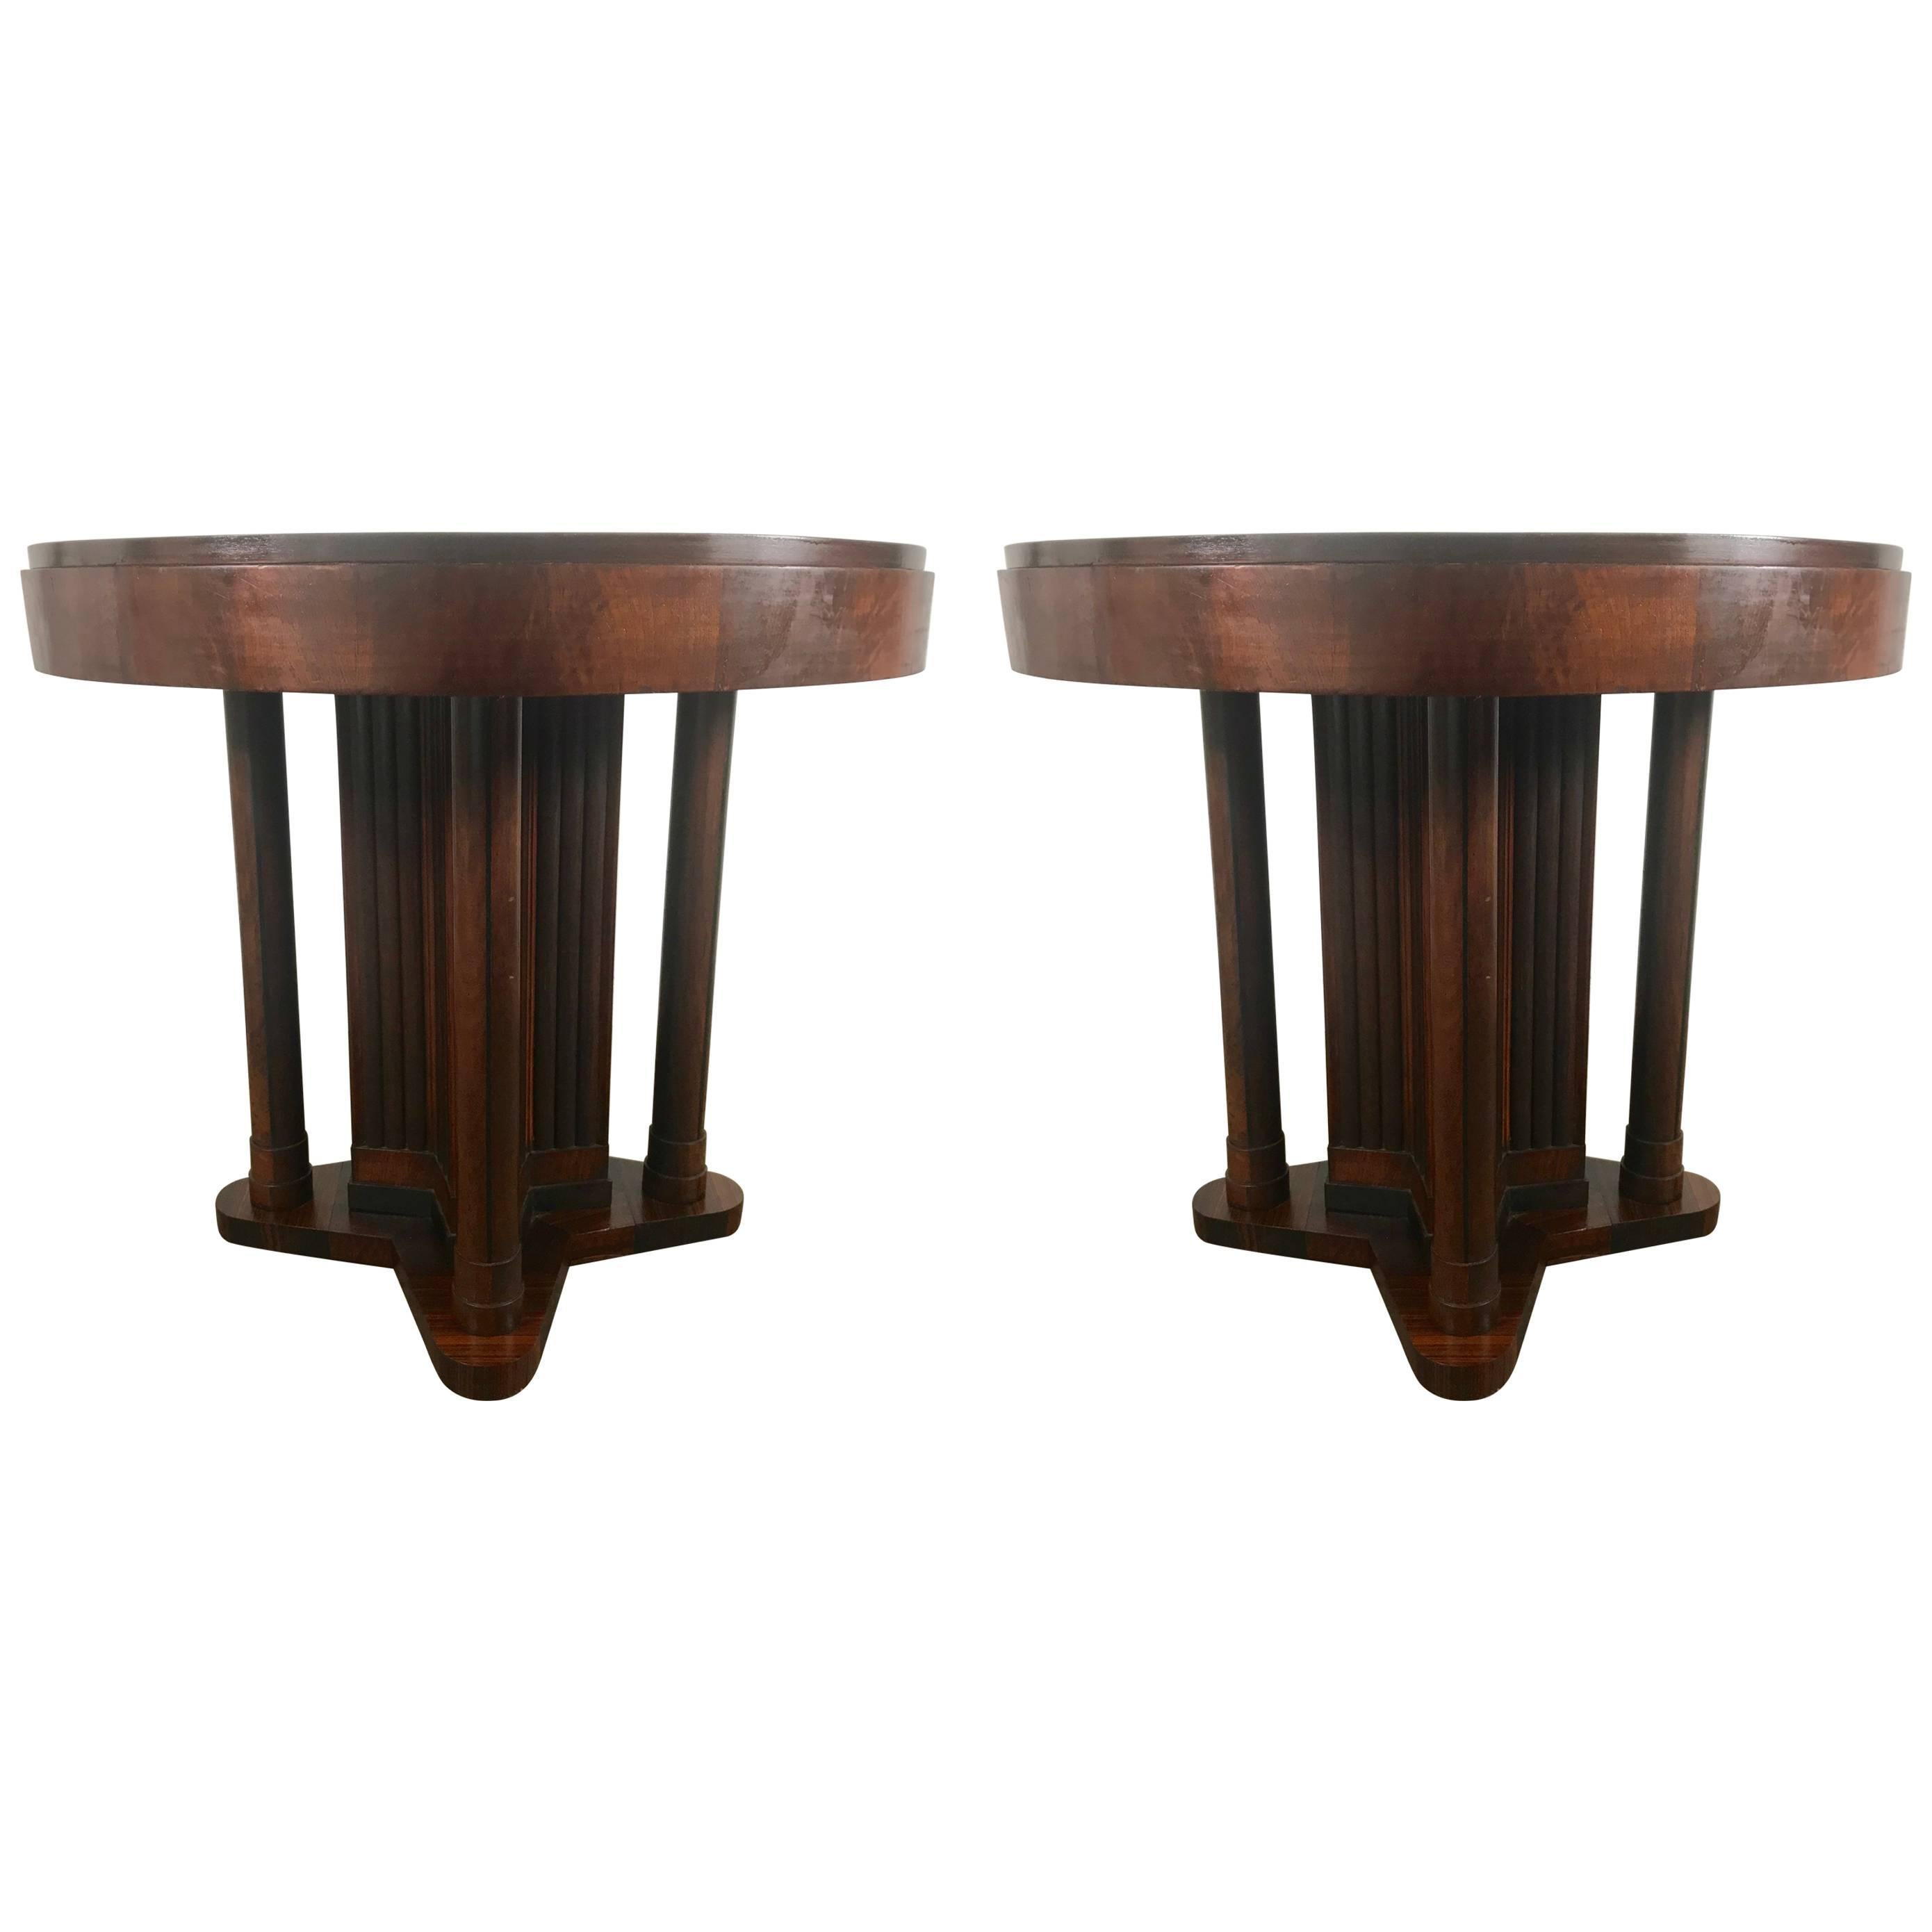 Eugene Schoen Art Deco Inlay Rosewood Columned Centre Tables